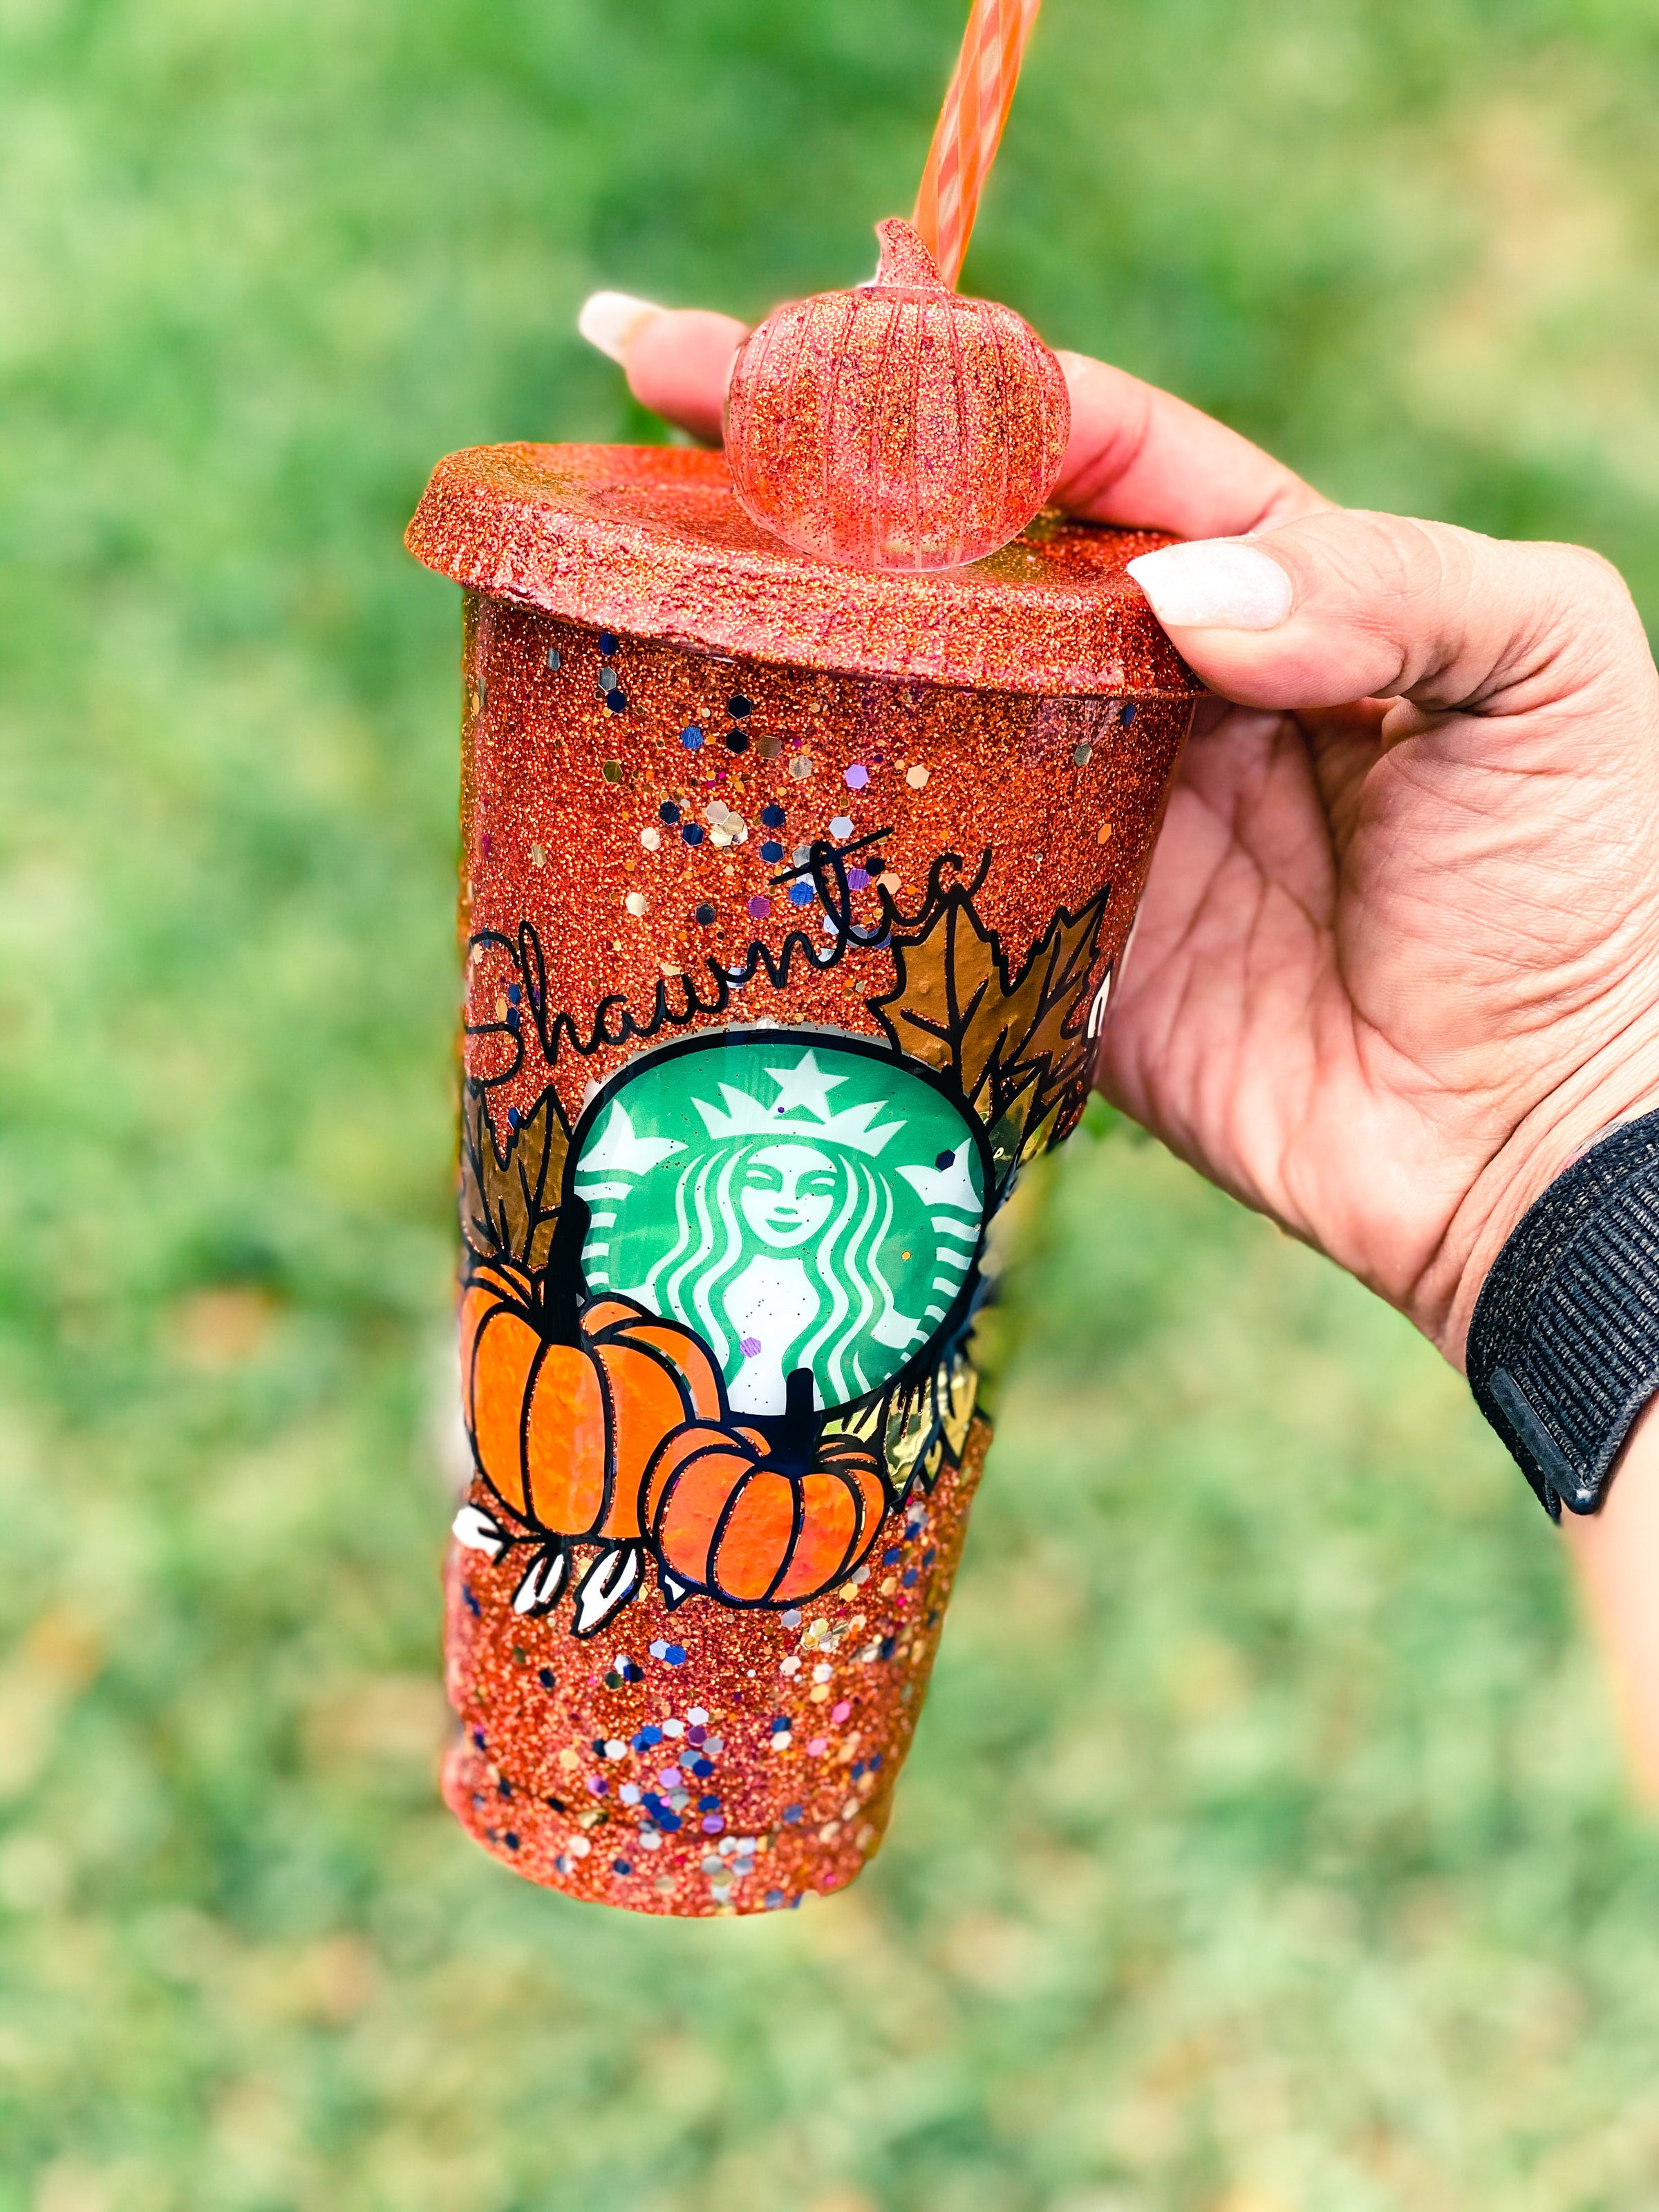 Mothers day Custom Starbucks Cold Cups - Eventeny